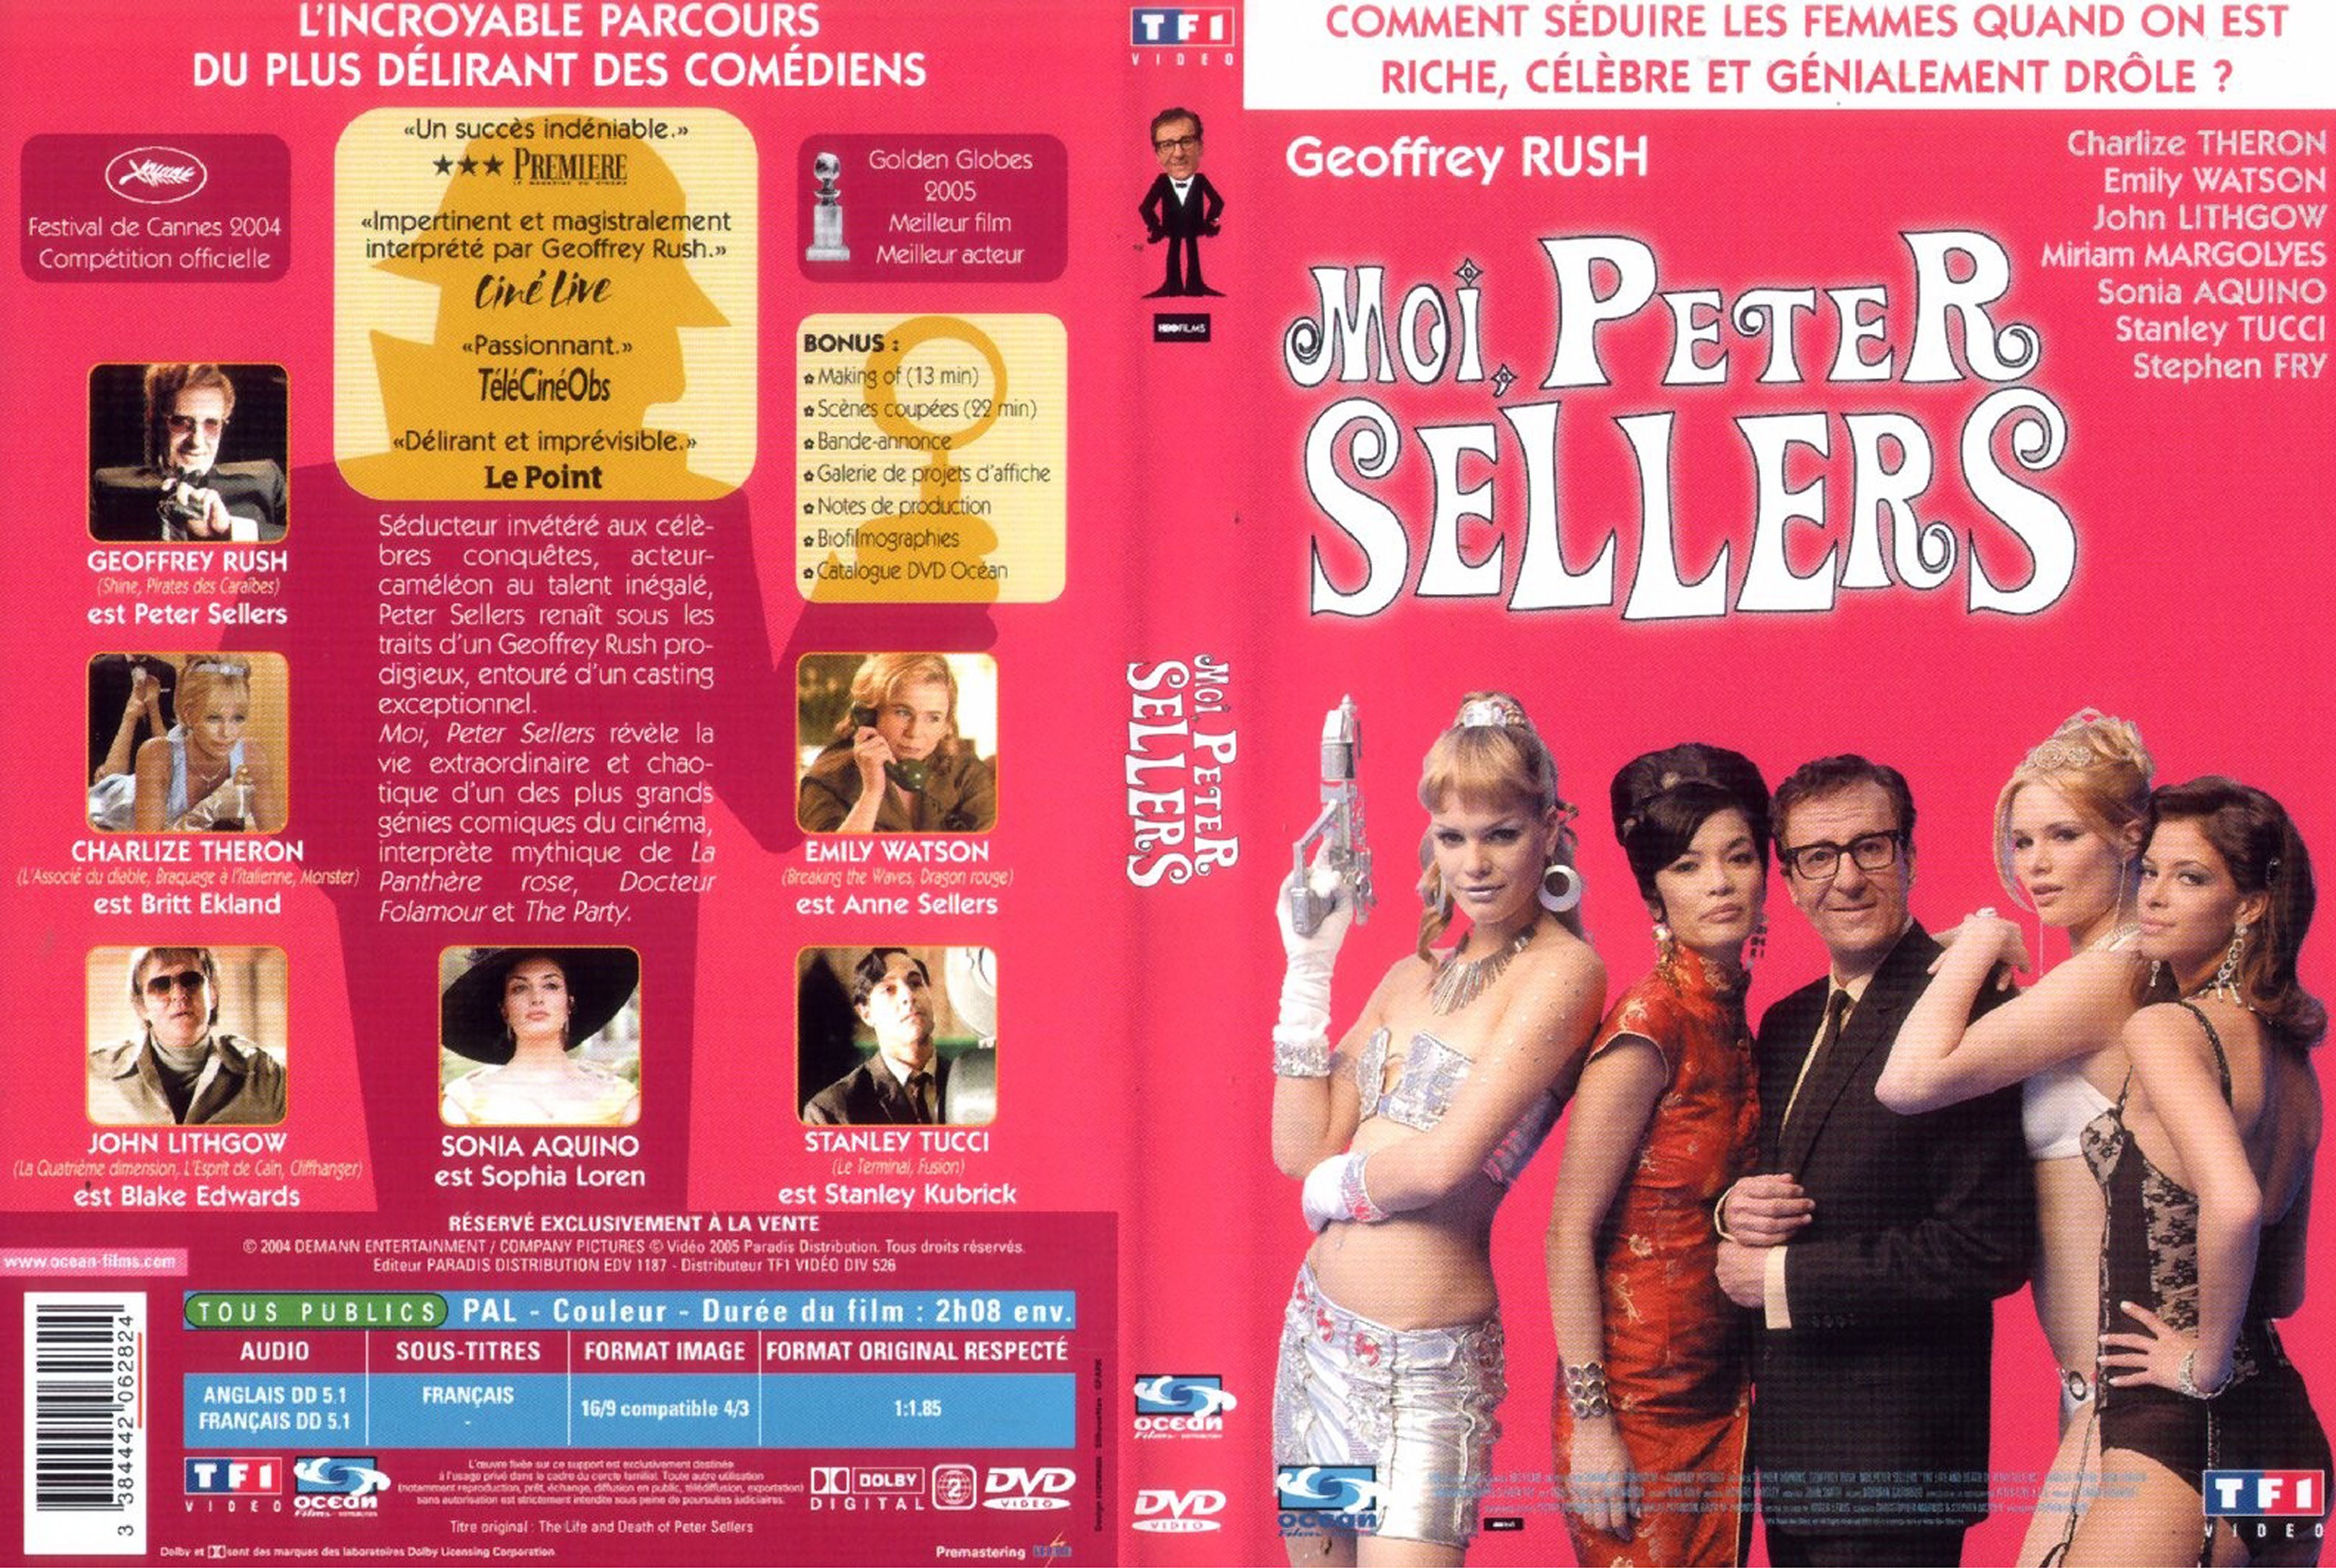 Jaquette DVD Moi Peter Sellers